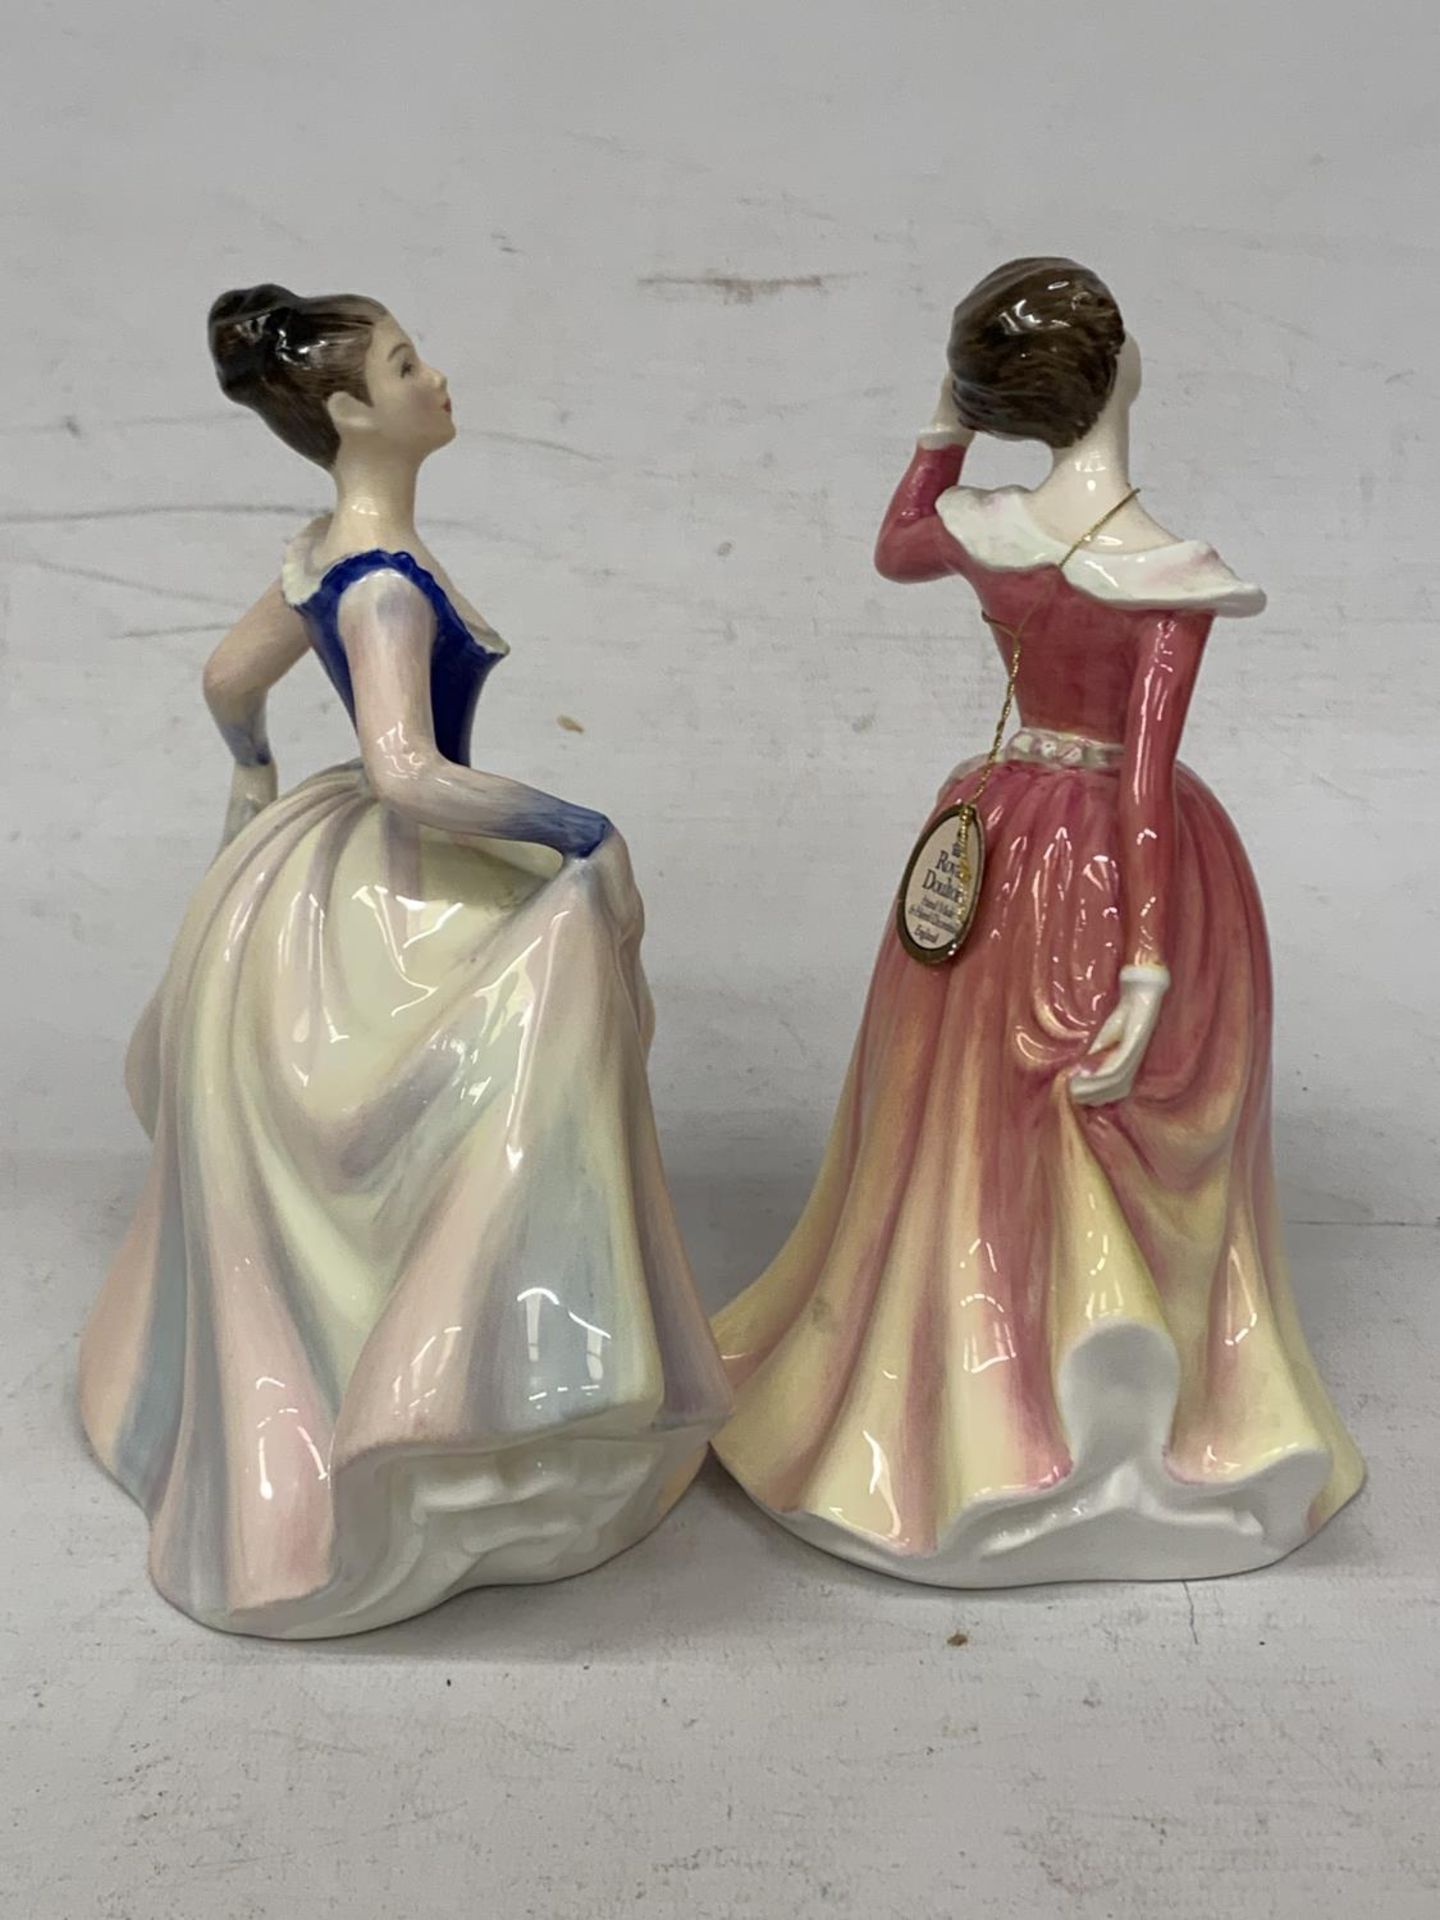 TWO ROYAL DOULTON FIGURES "LISA" HN 2394 AND "PATRICIA" HN 3907 - Image 2 of 4